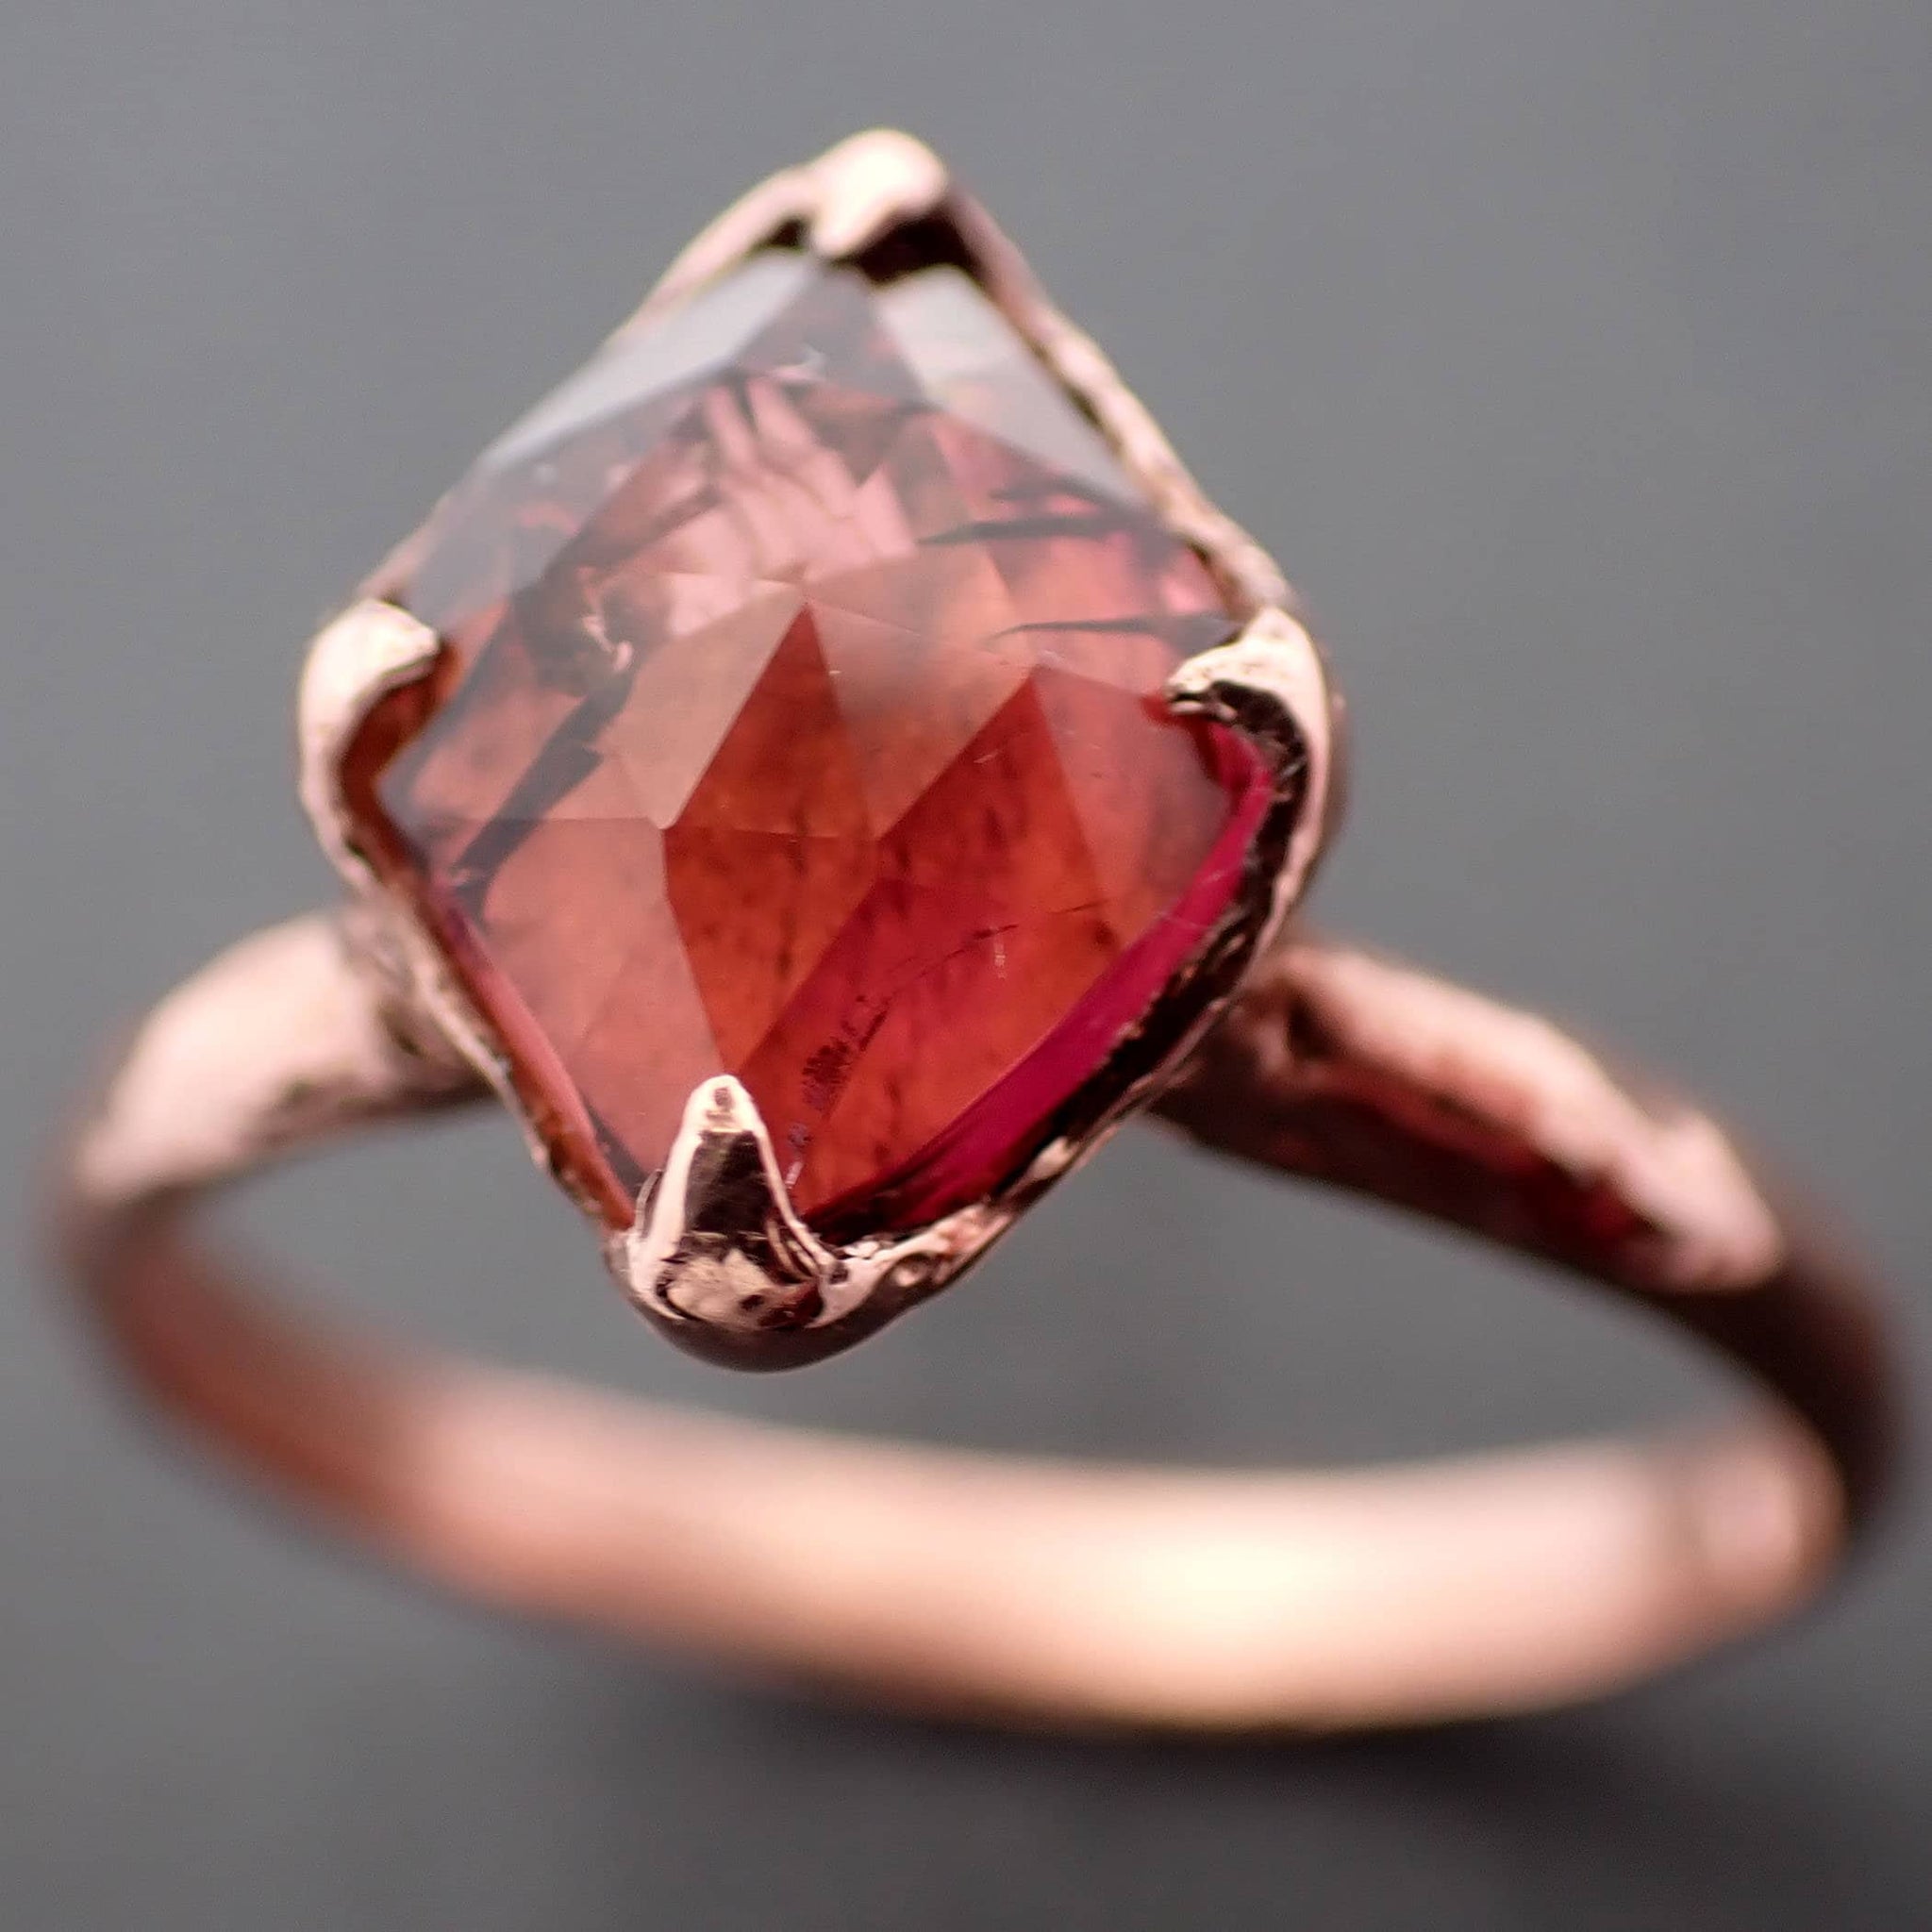 Fancy cut red Tourmaline Rose Gold Ring Gemstone Solitaire recycled 14k statement cocktail statement 3340